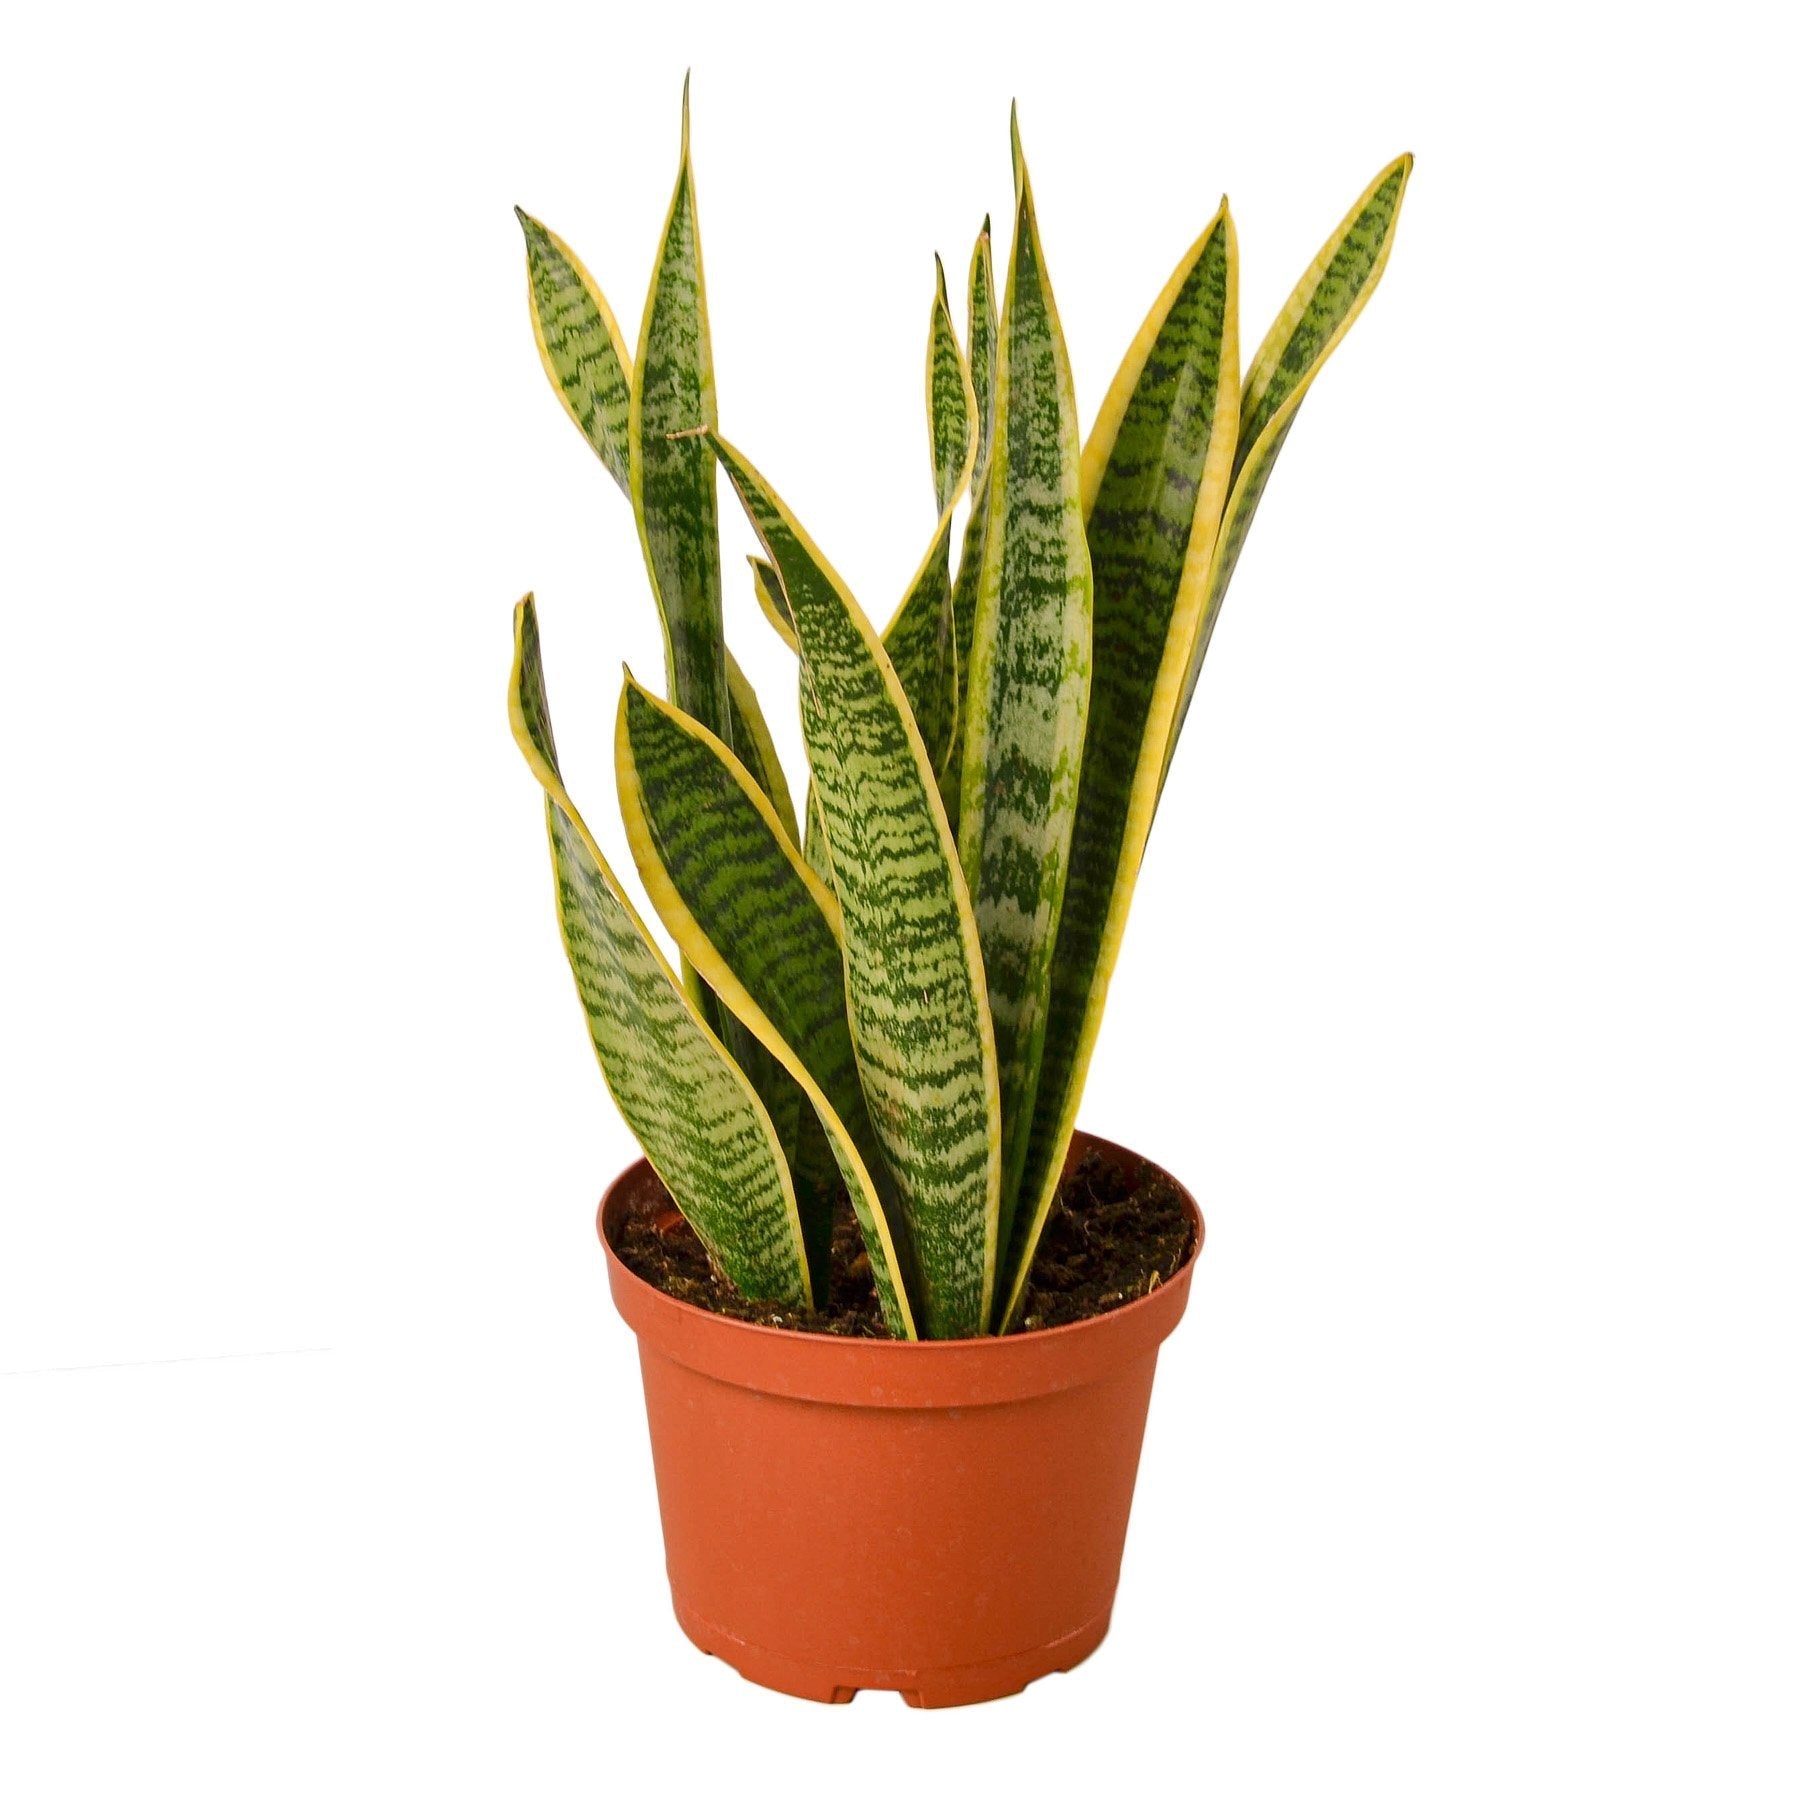 A snake plant in a pot on a white background with nursery near me.